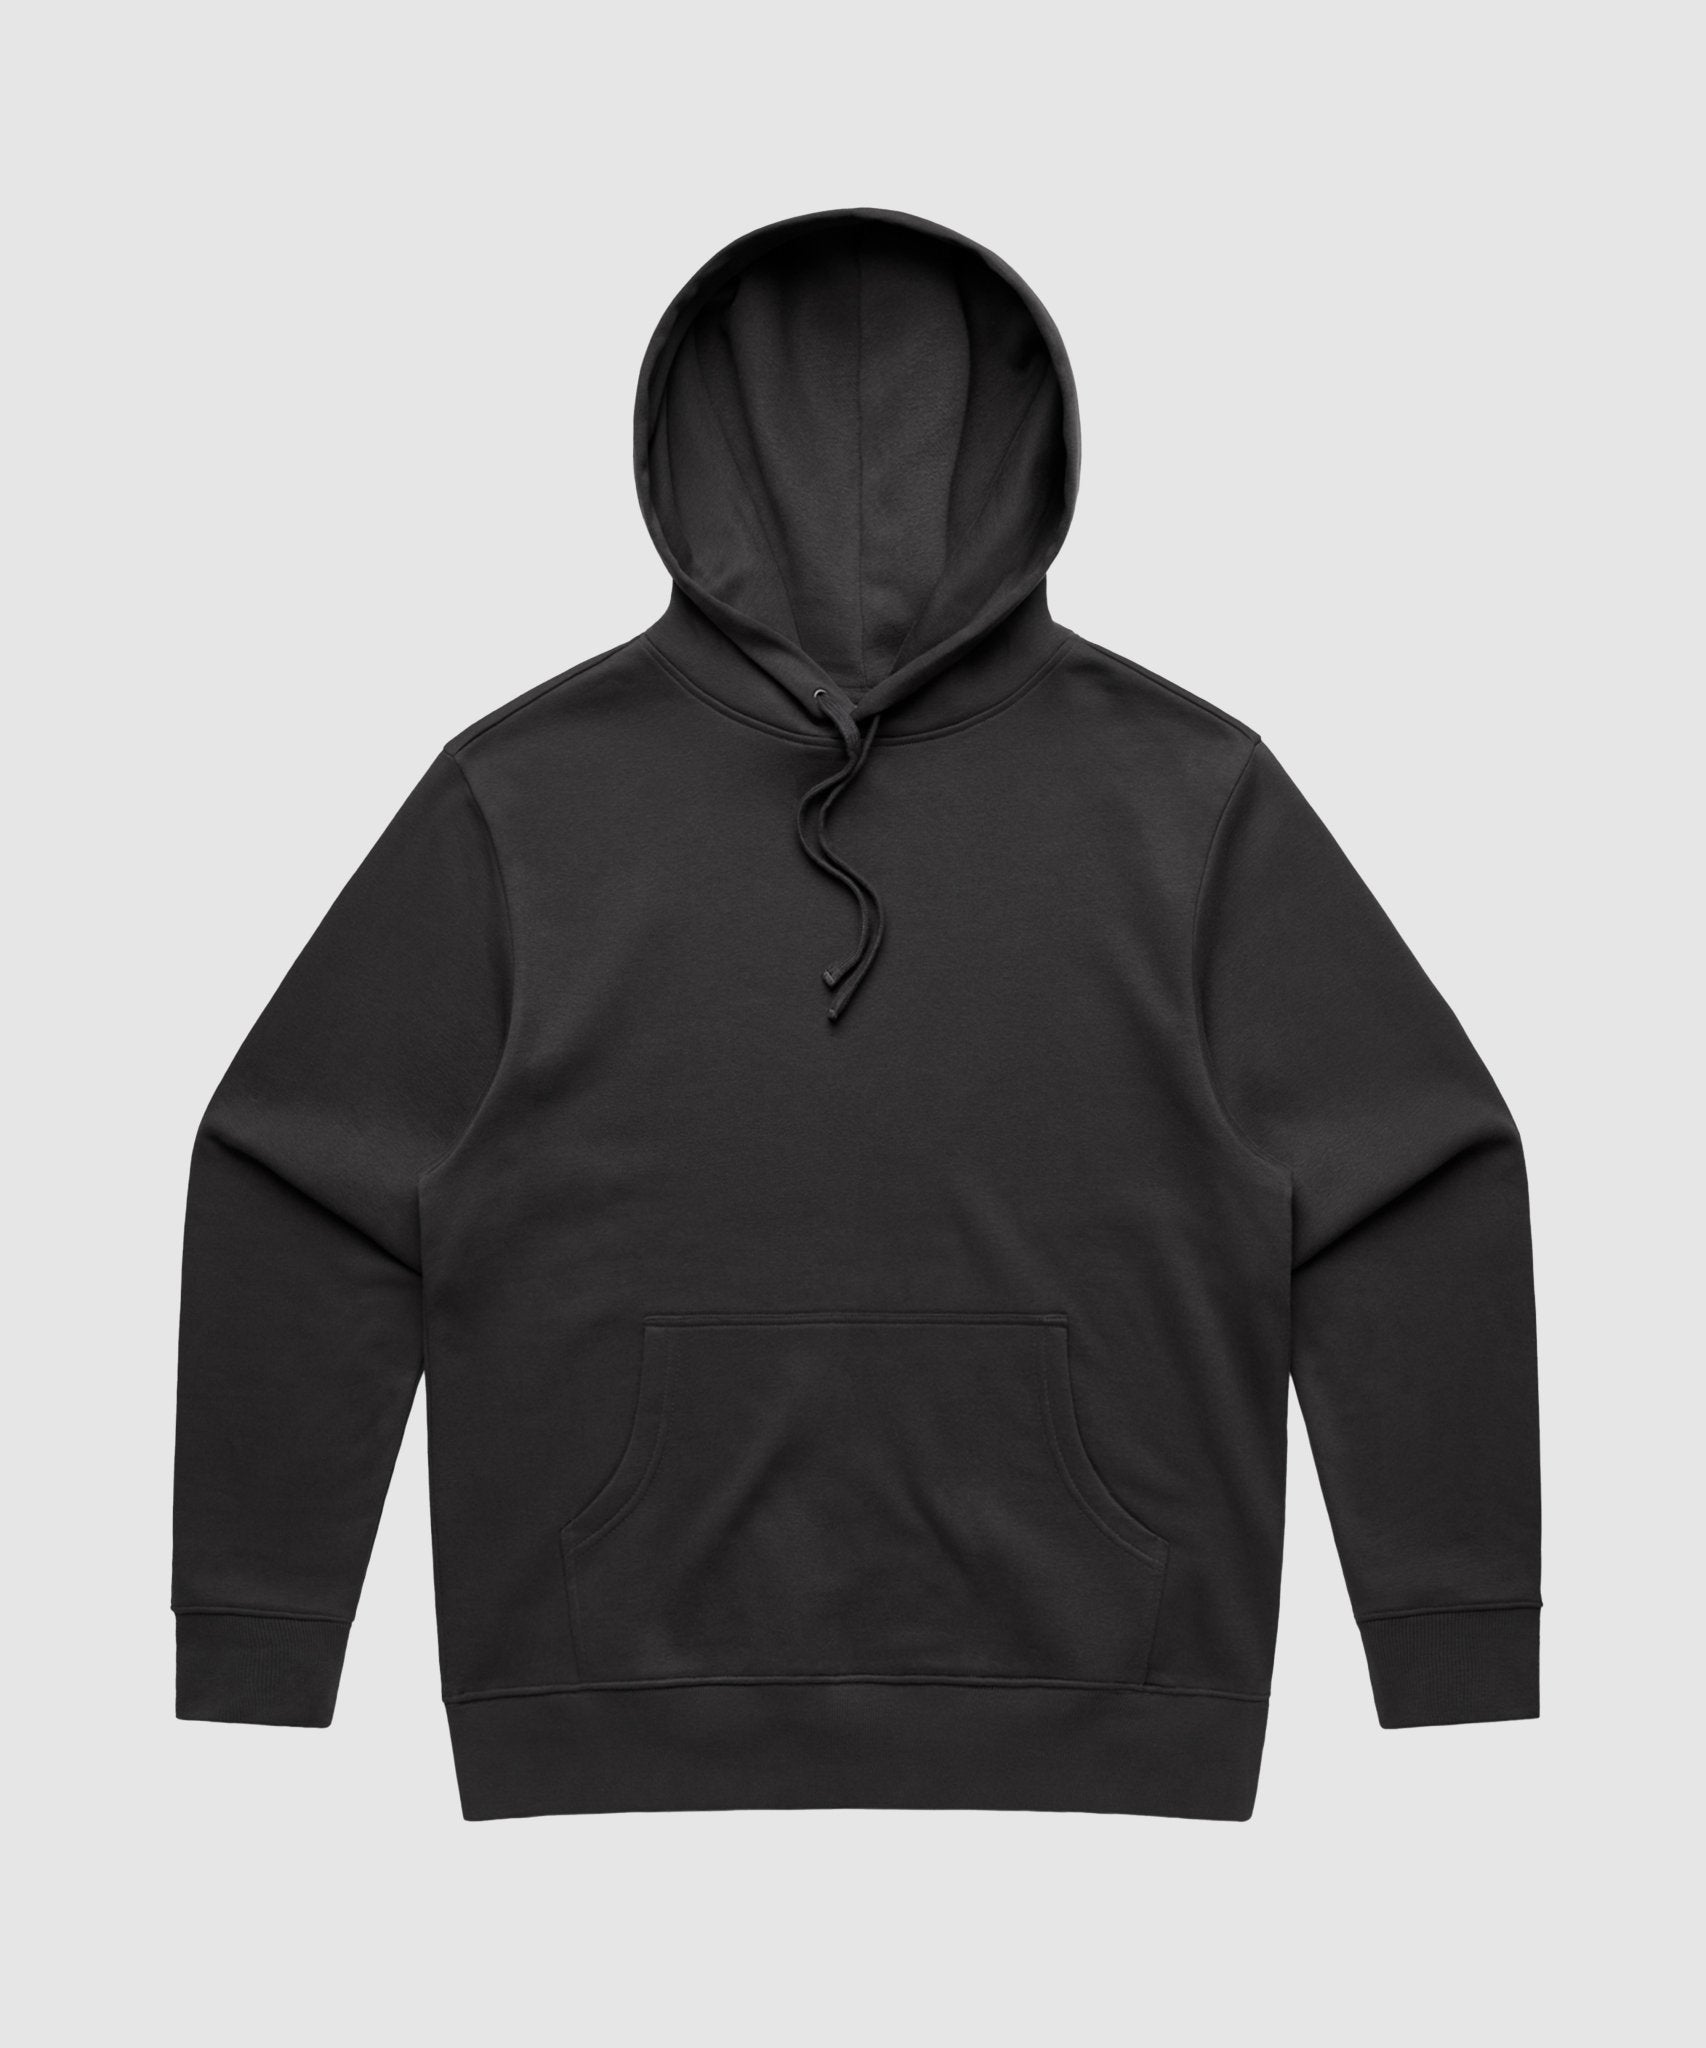 G West Relaxed Fit Heavyweight Hoody - 6 Colors - Ships Immediately - G West Blanks